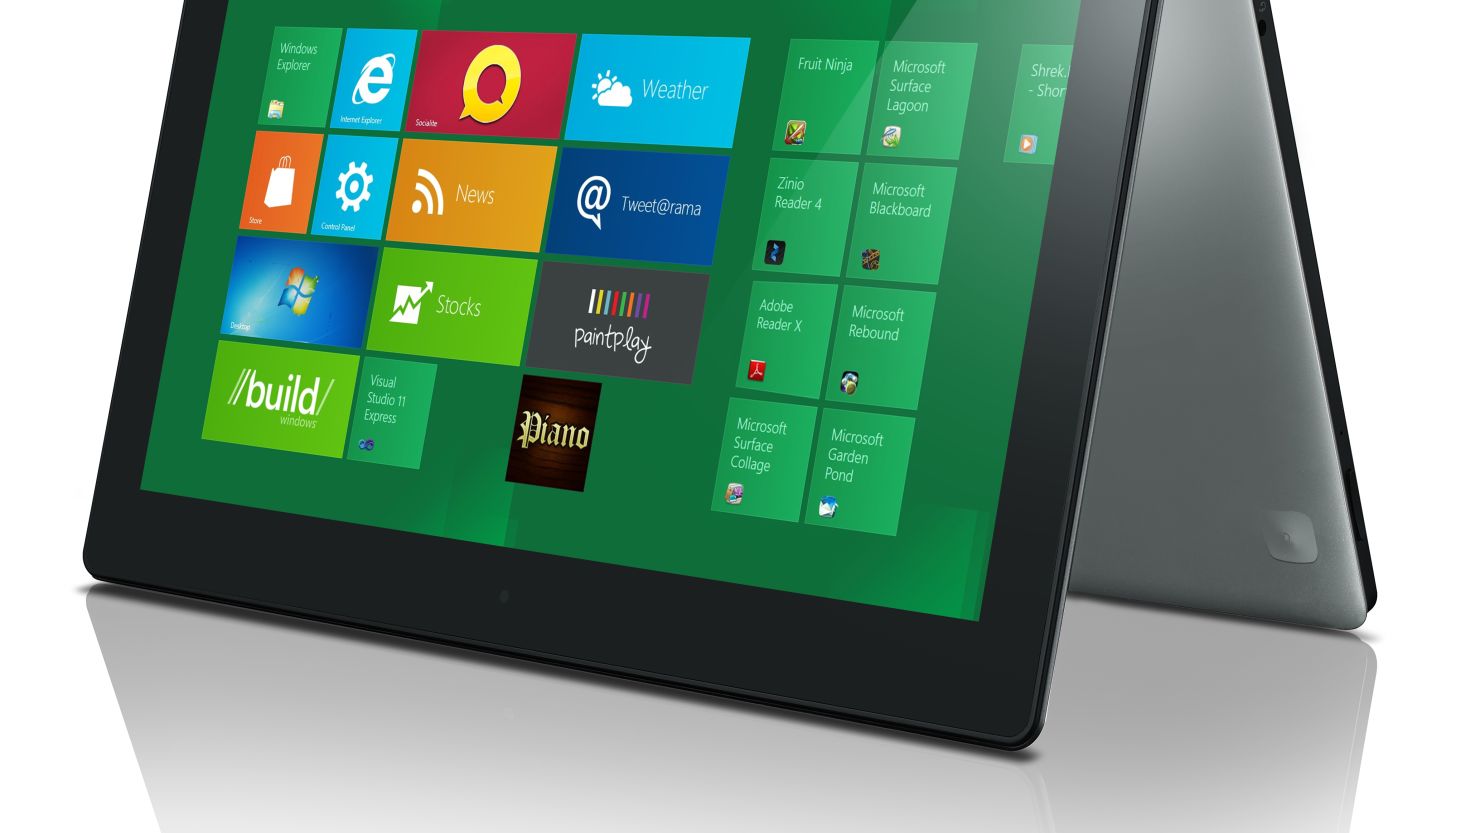 Microsoft rolled out the final preview version of its Windows 8 operating system Friday.